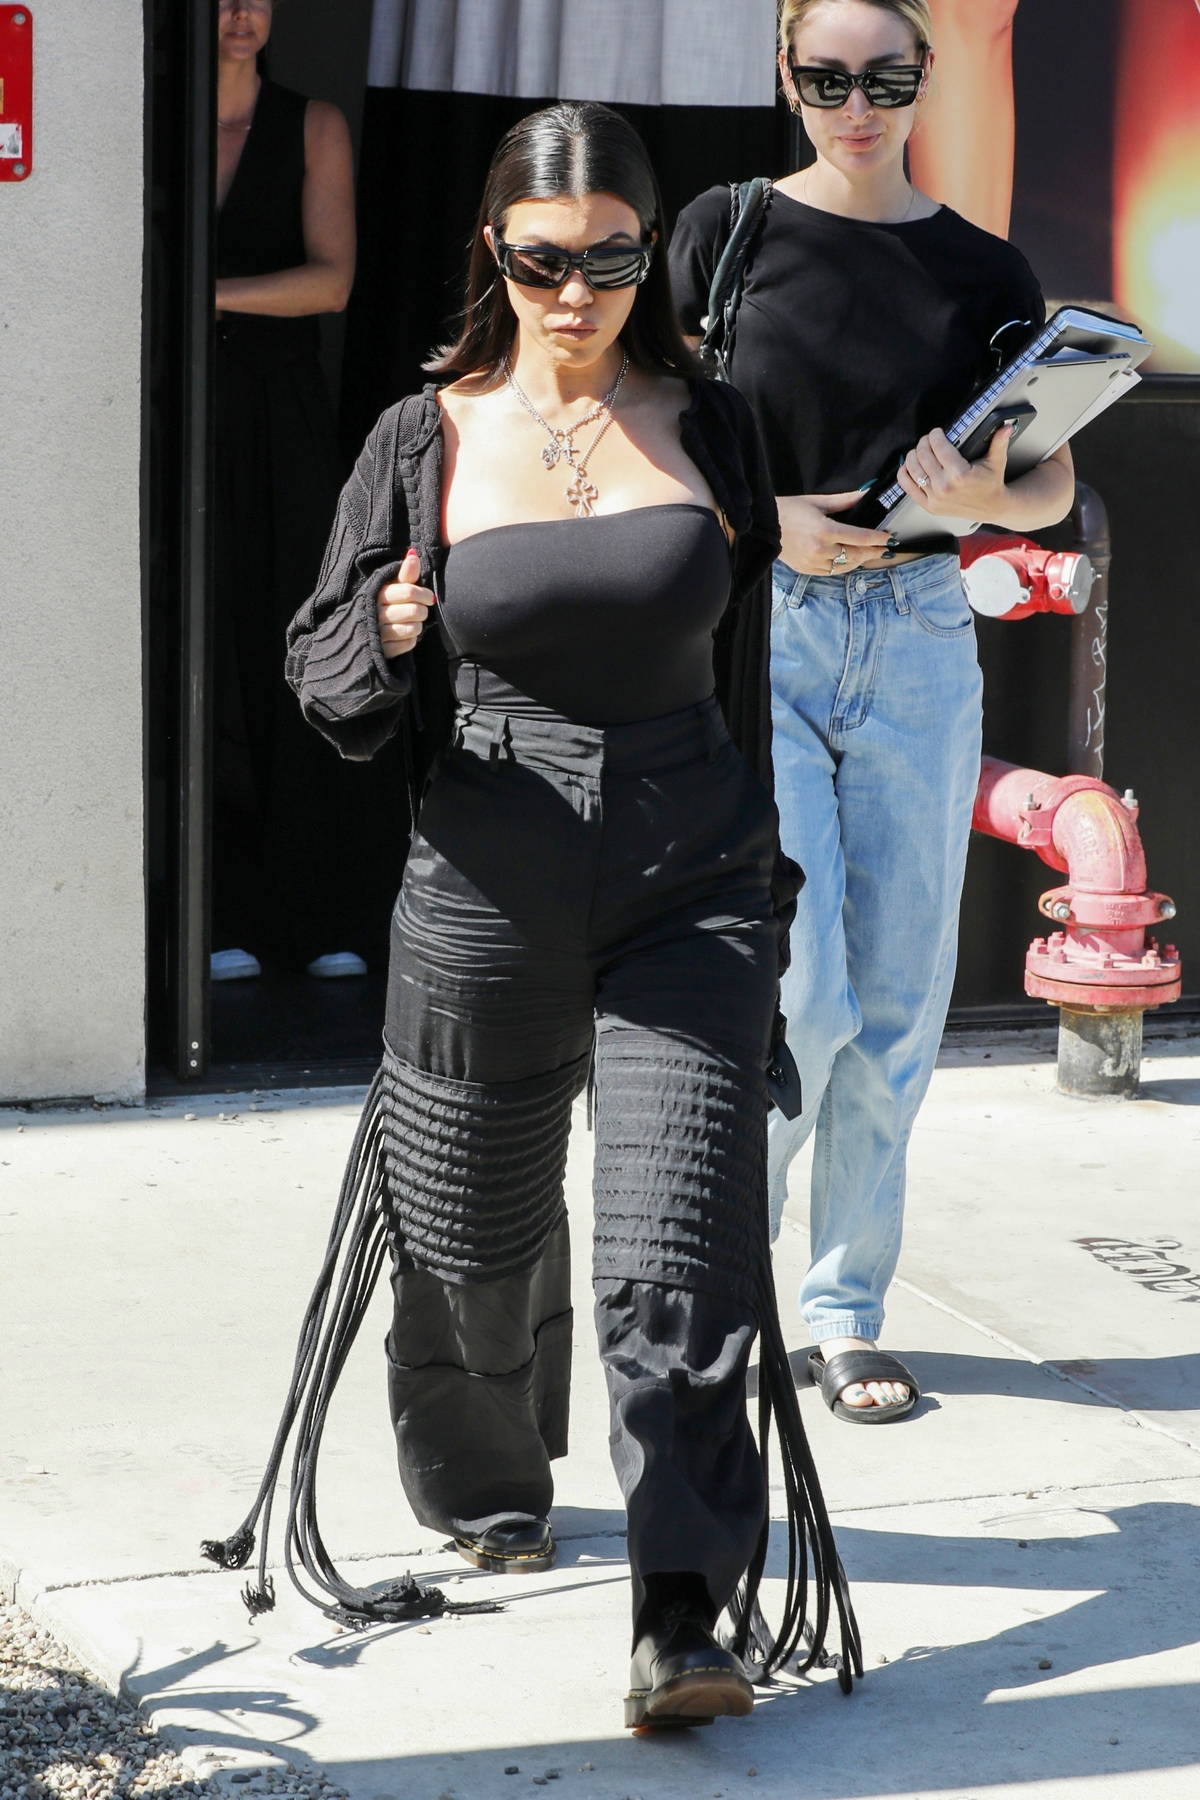 https://www.celebsfirst.com/wp-content/uploads/2022/06/kourtney-kardashian-dons-all-black-as-she-leaves-after-a-photoshoot-at-the-boohoo-store-in-west-hollywood-california-210622_3.jpg